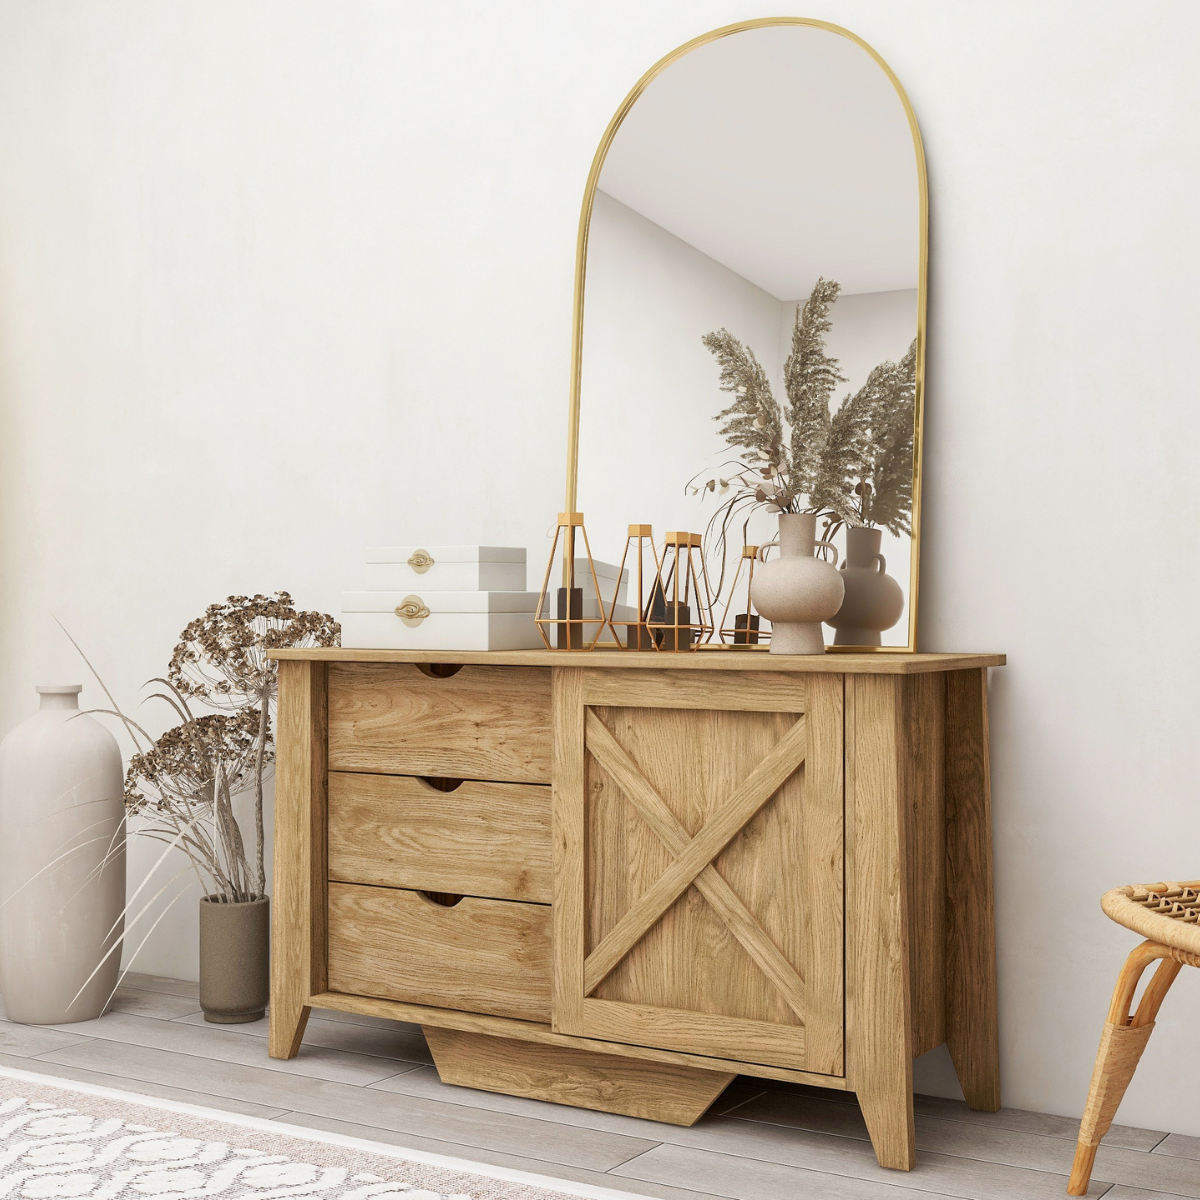 Mica Wooden Sliding door Sideboard with 3 Drawers